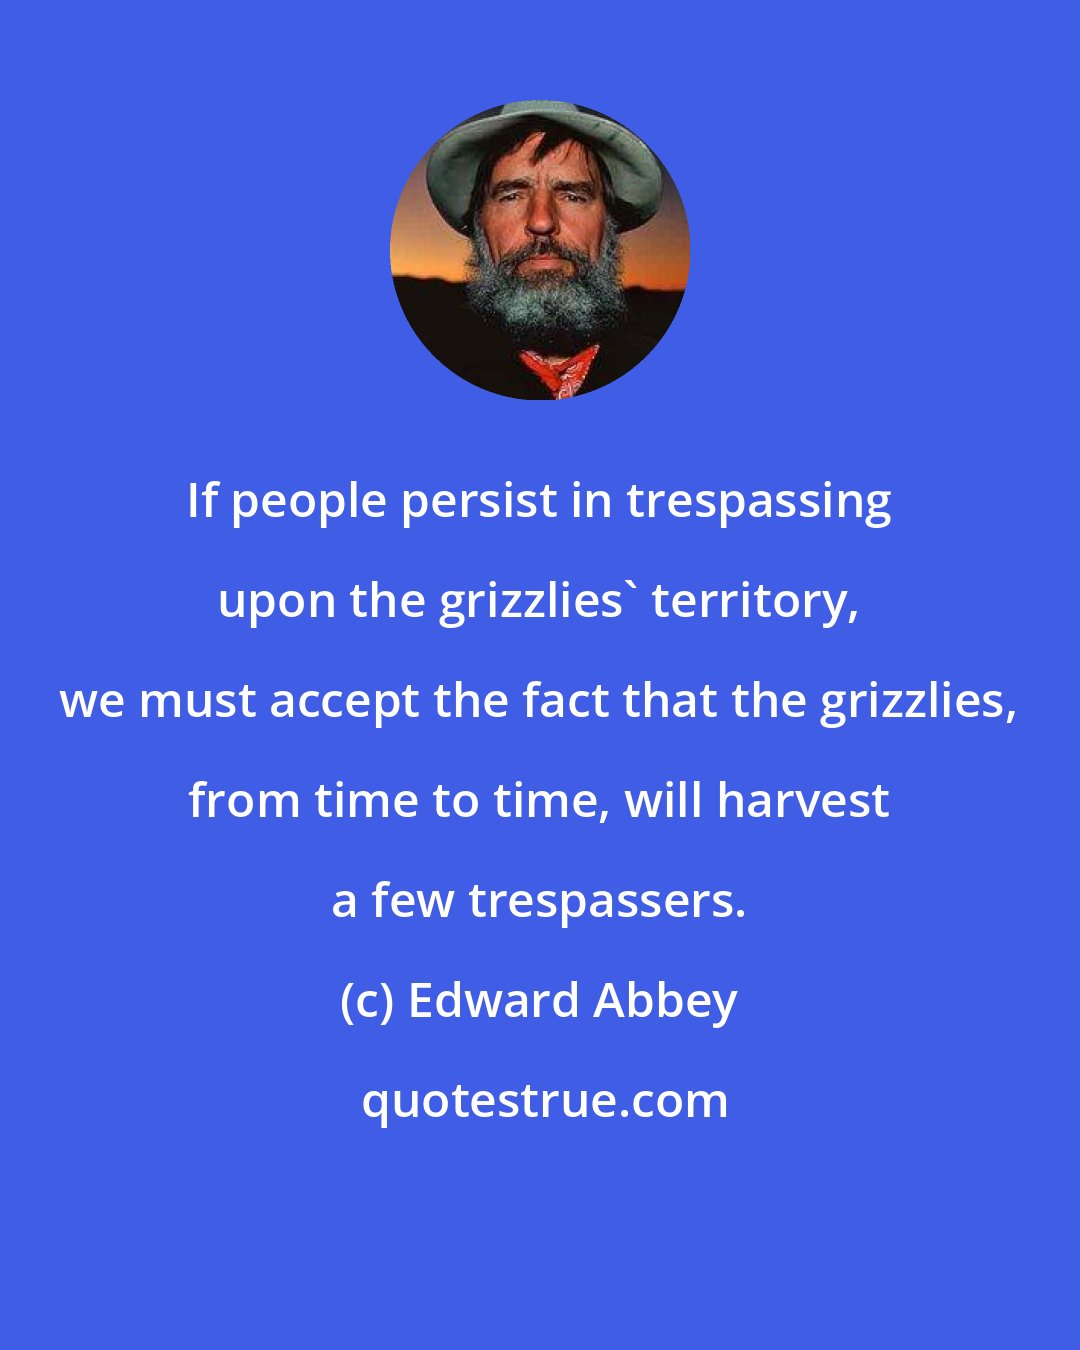 Edward Abbey: If people persist in trespassing upon the grizzlies' territory, we must accept the fact that the grizzlies, from time to time, will harvest a few trespassers.